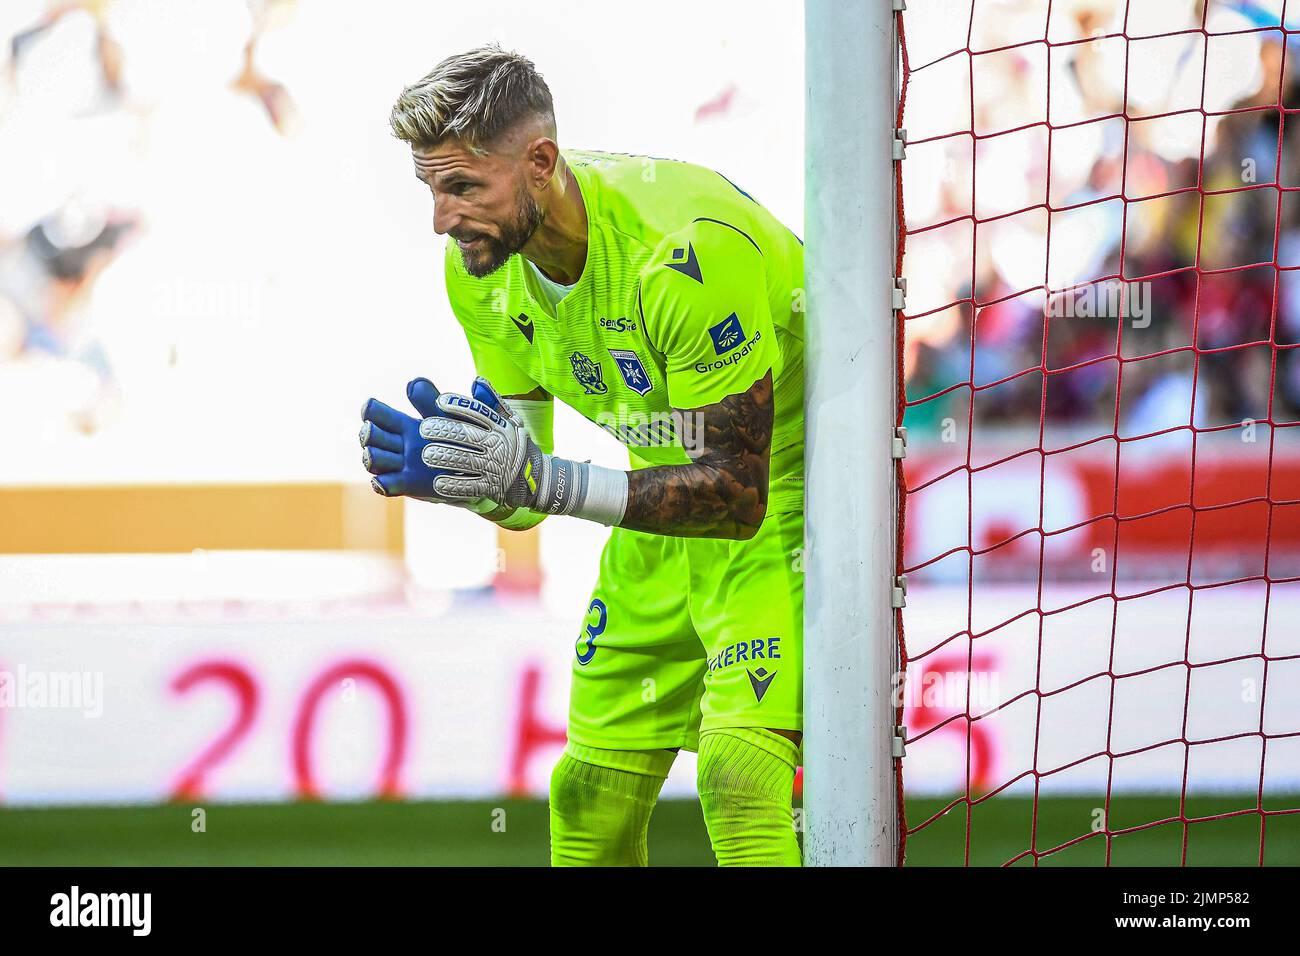 LILLE, FRANCE - AUGUST 7: Benoit Costil of Auxerre during the French Ligue 1 match between Lille and Auxerre at Stade Pierre Mauroy on August 7, 2022 in Lille, France (Photo by Matthieu Mirville/Orange Pictures) Stock Photo